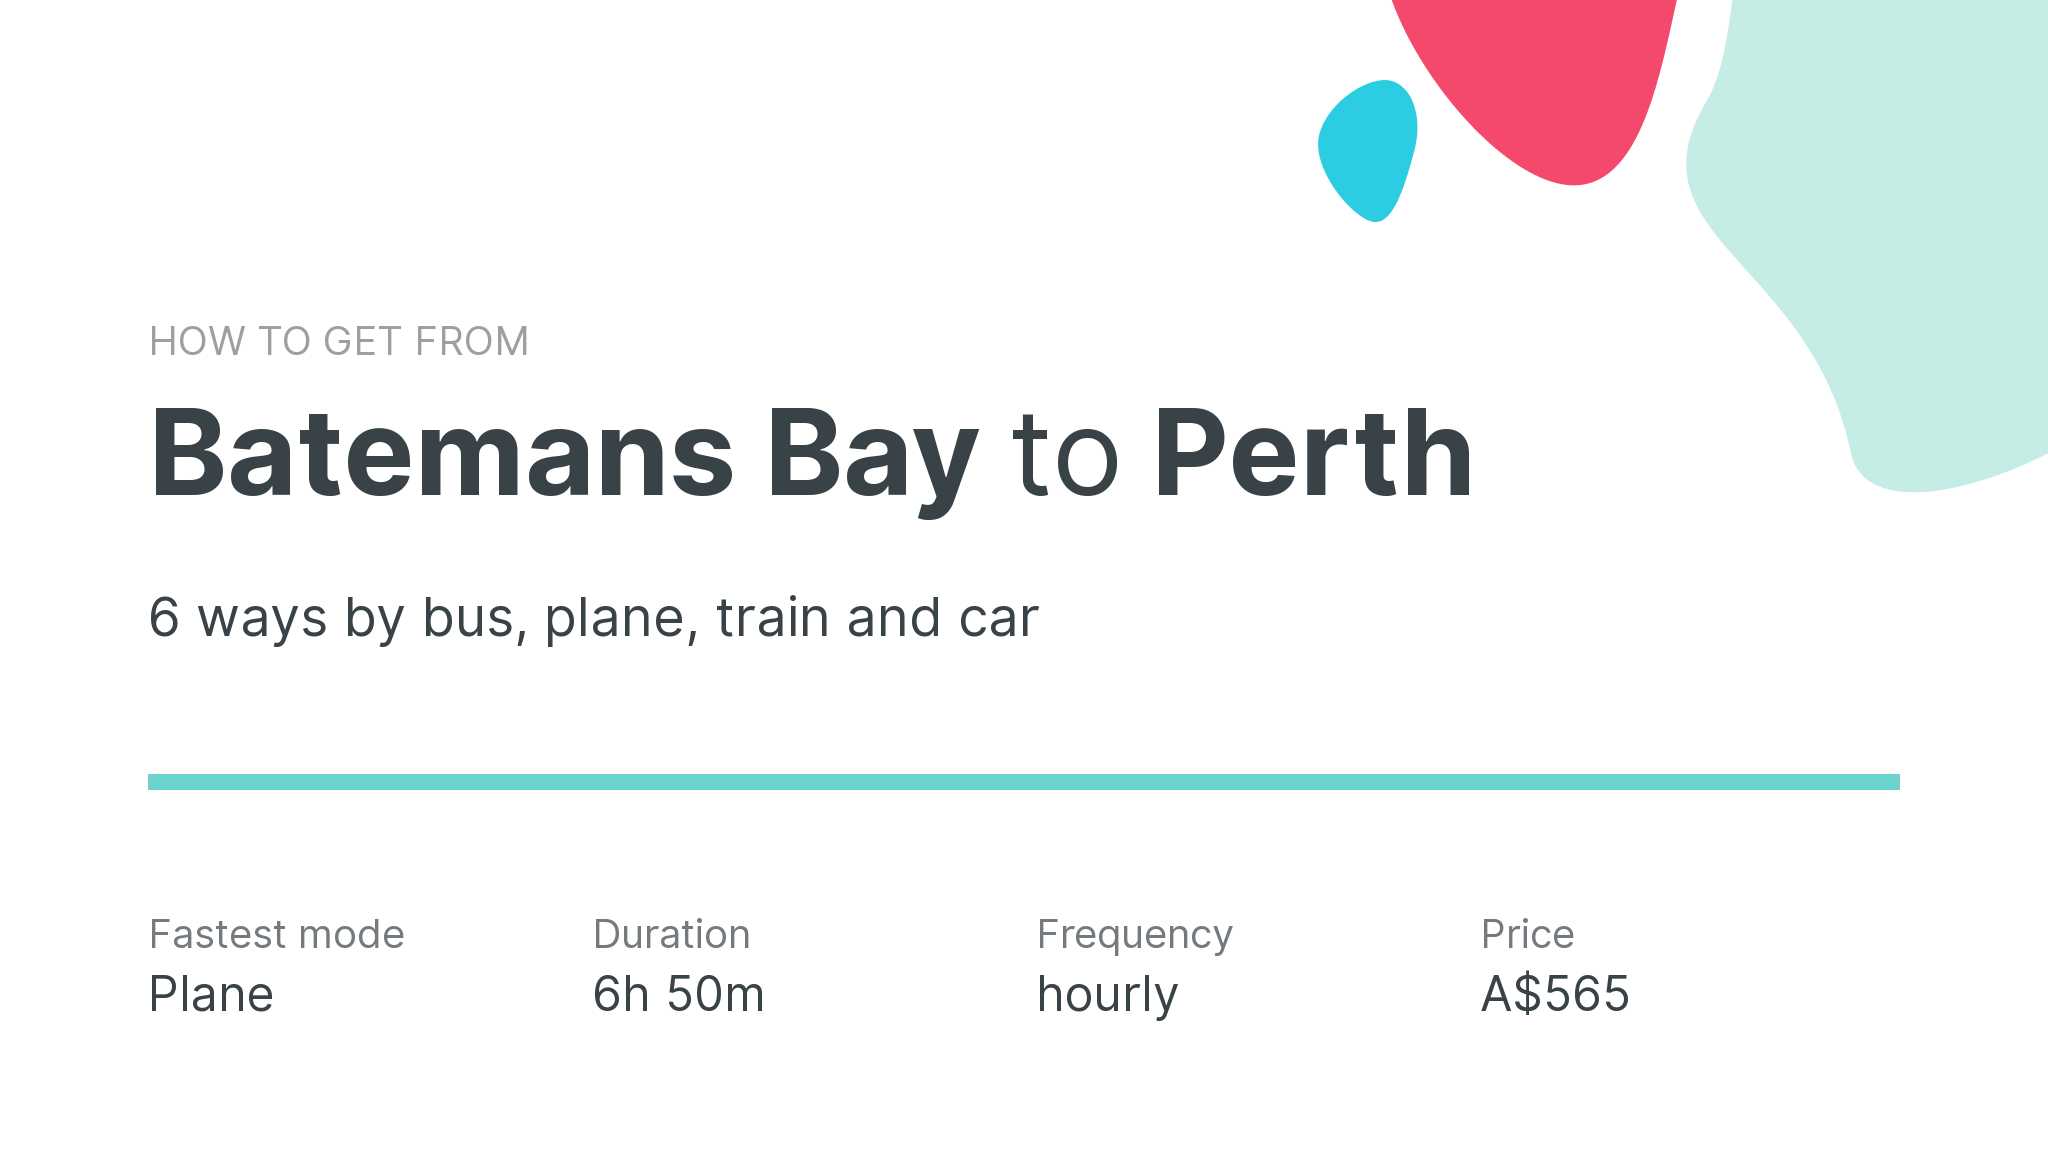 How do I get from Batemans Bay to Perth